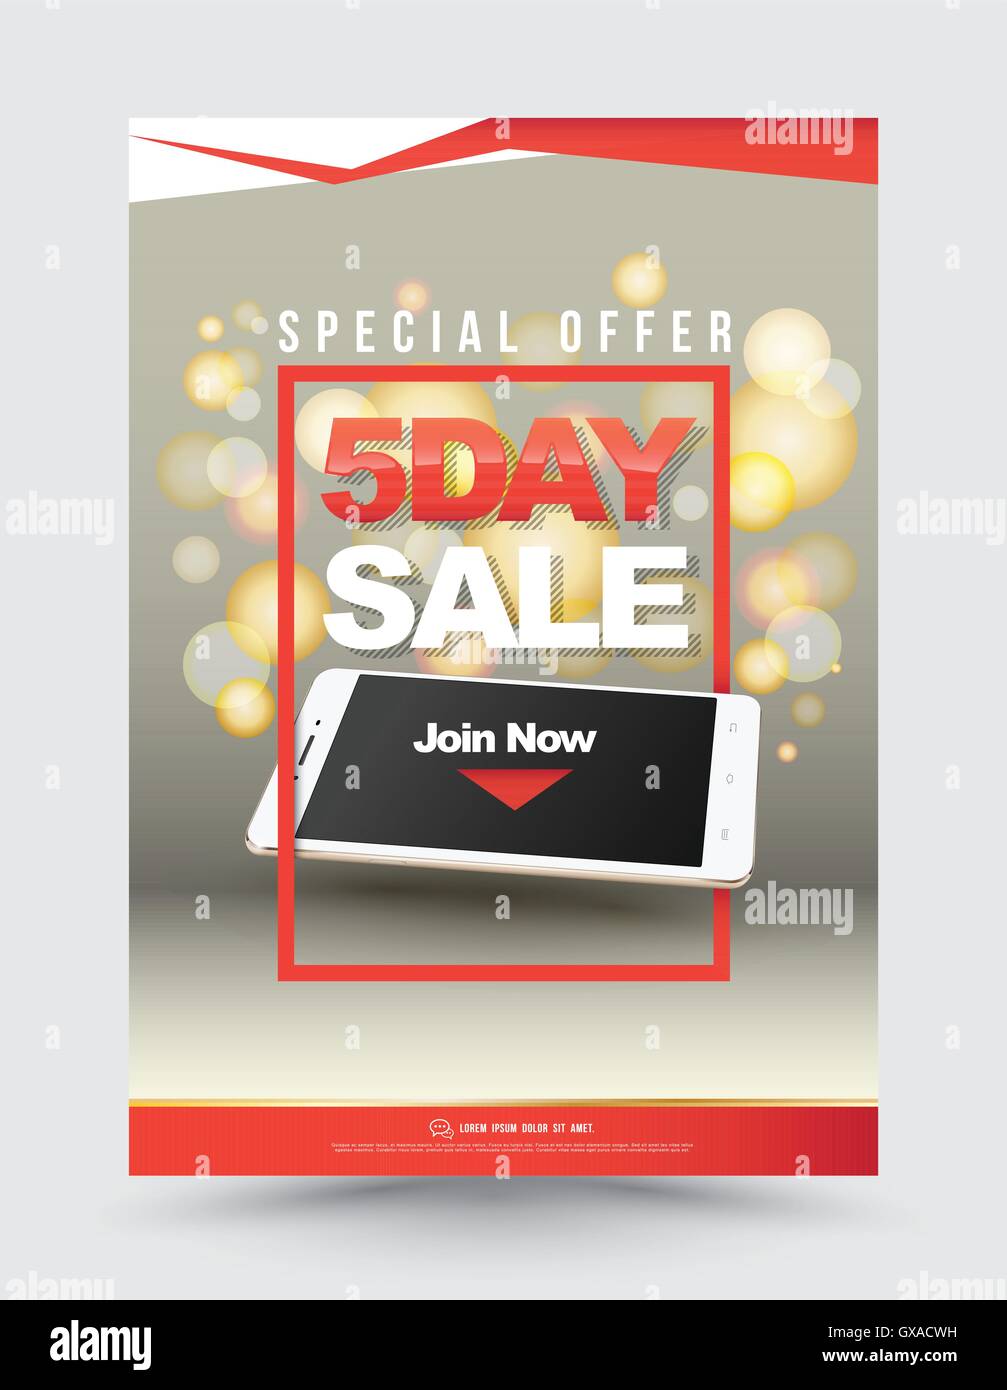 5th day sale poster. Sale and discounts advertising template. Vector illustration. Sale banner. Sale discount special offer. Pro Stock Vector